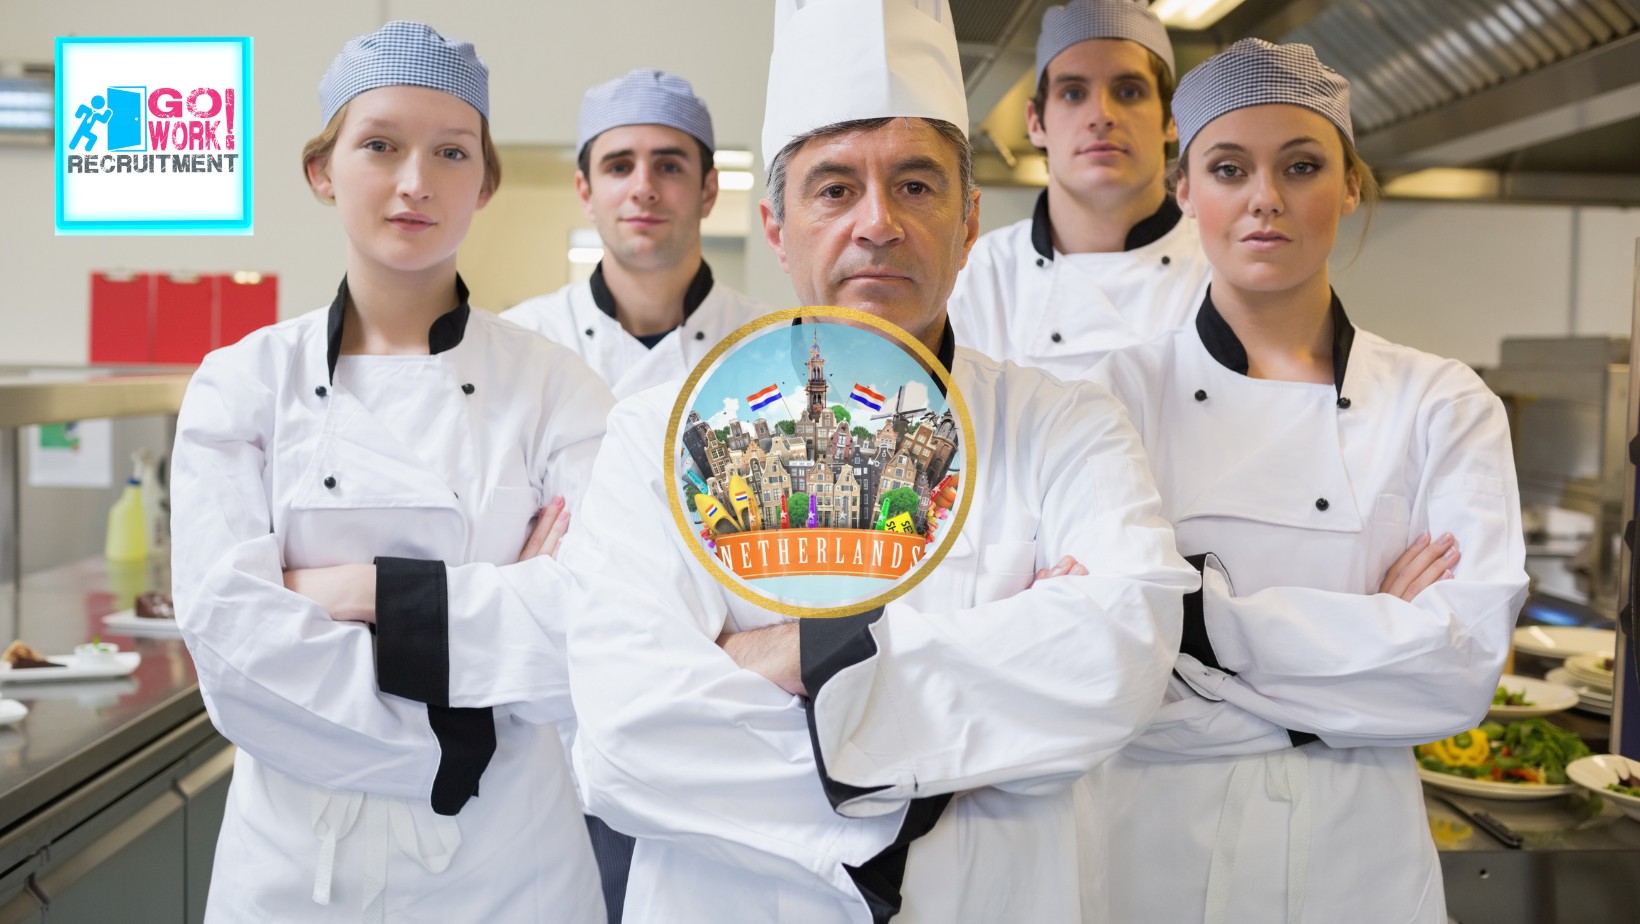 Chef jobs in The Netherlands